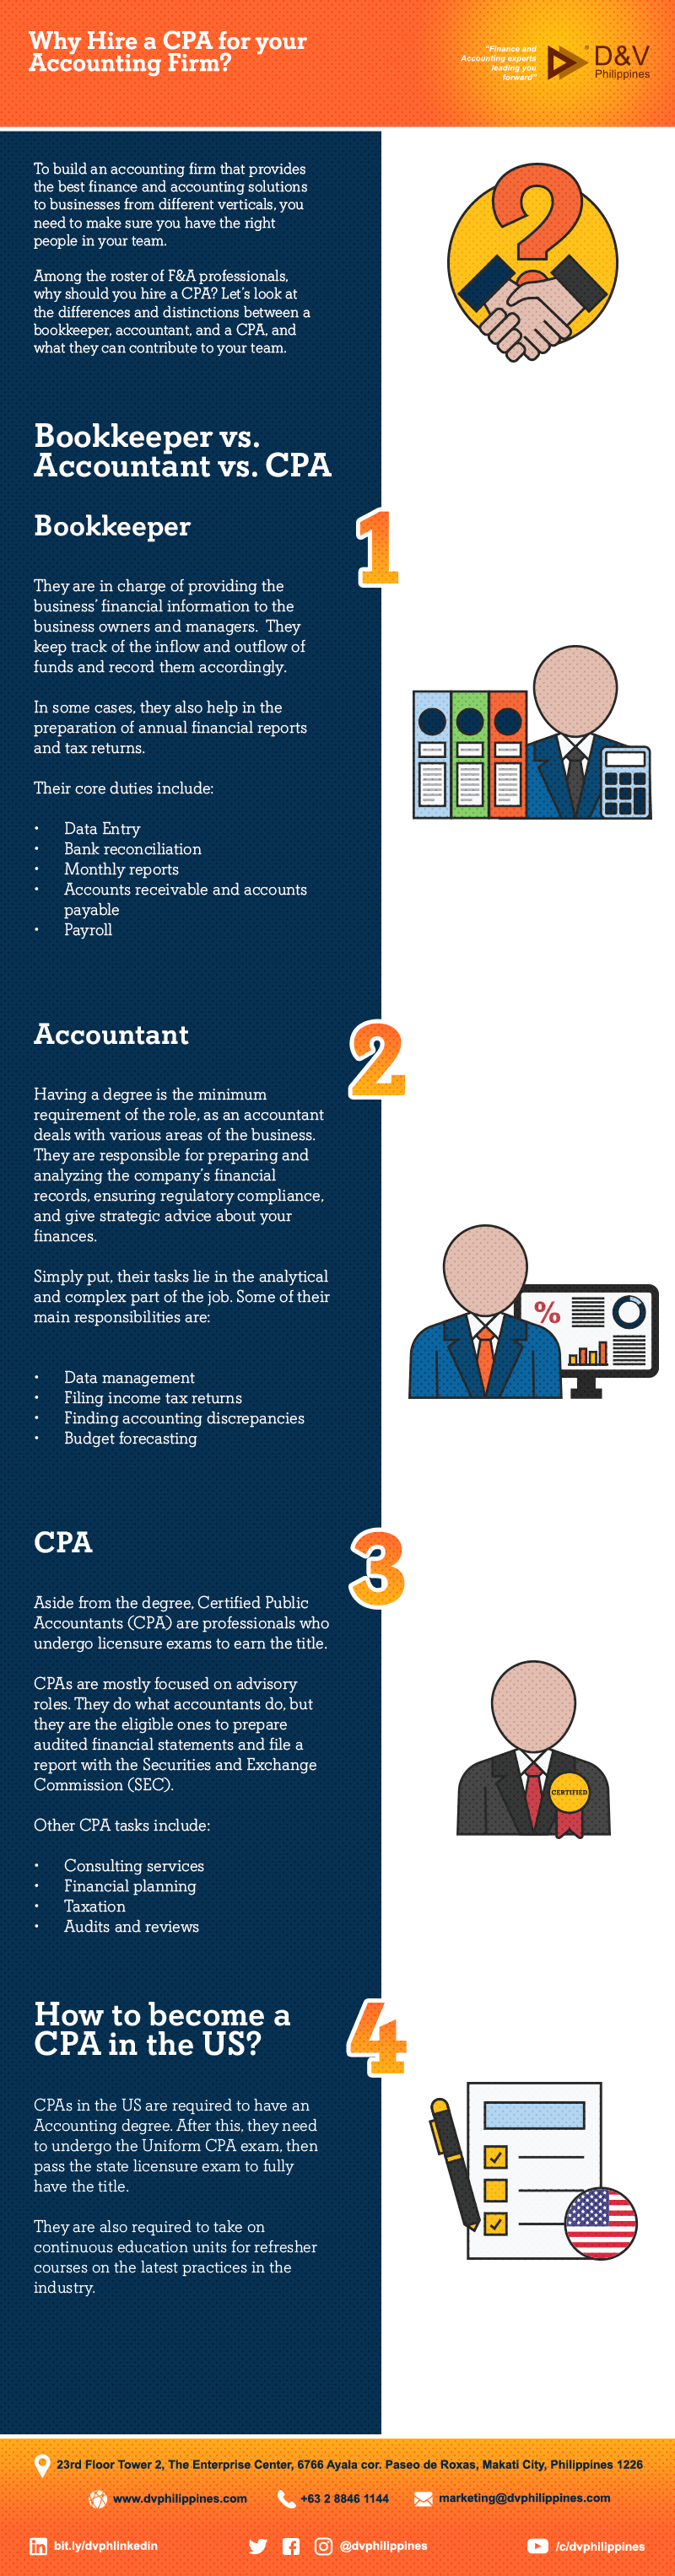 Infog_W_C_Why-Hire-a-CPA-for-your-Accounting-FirmMain